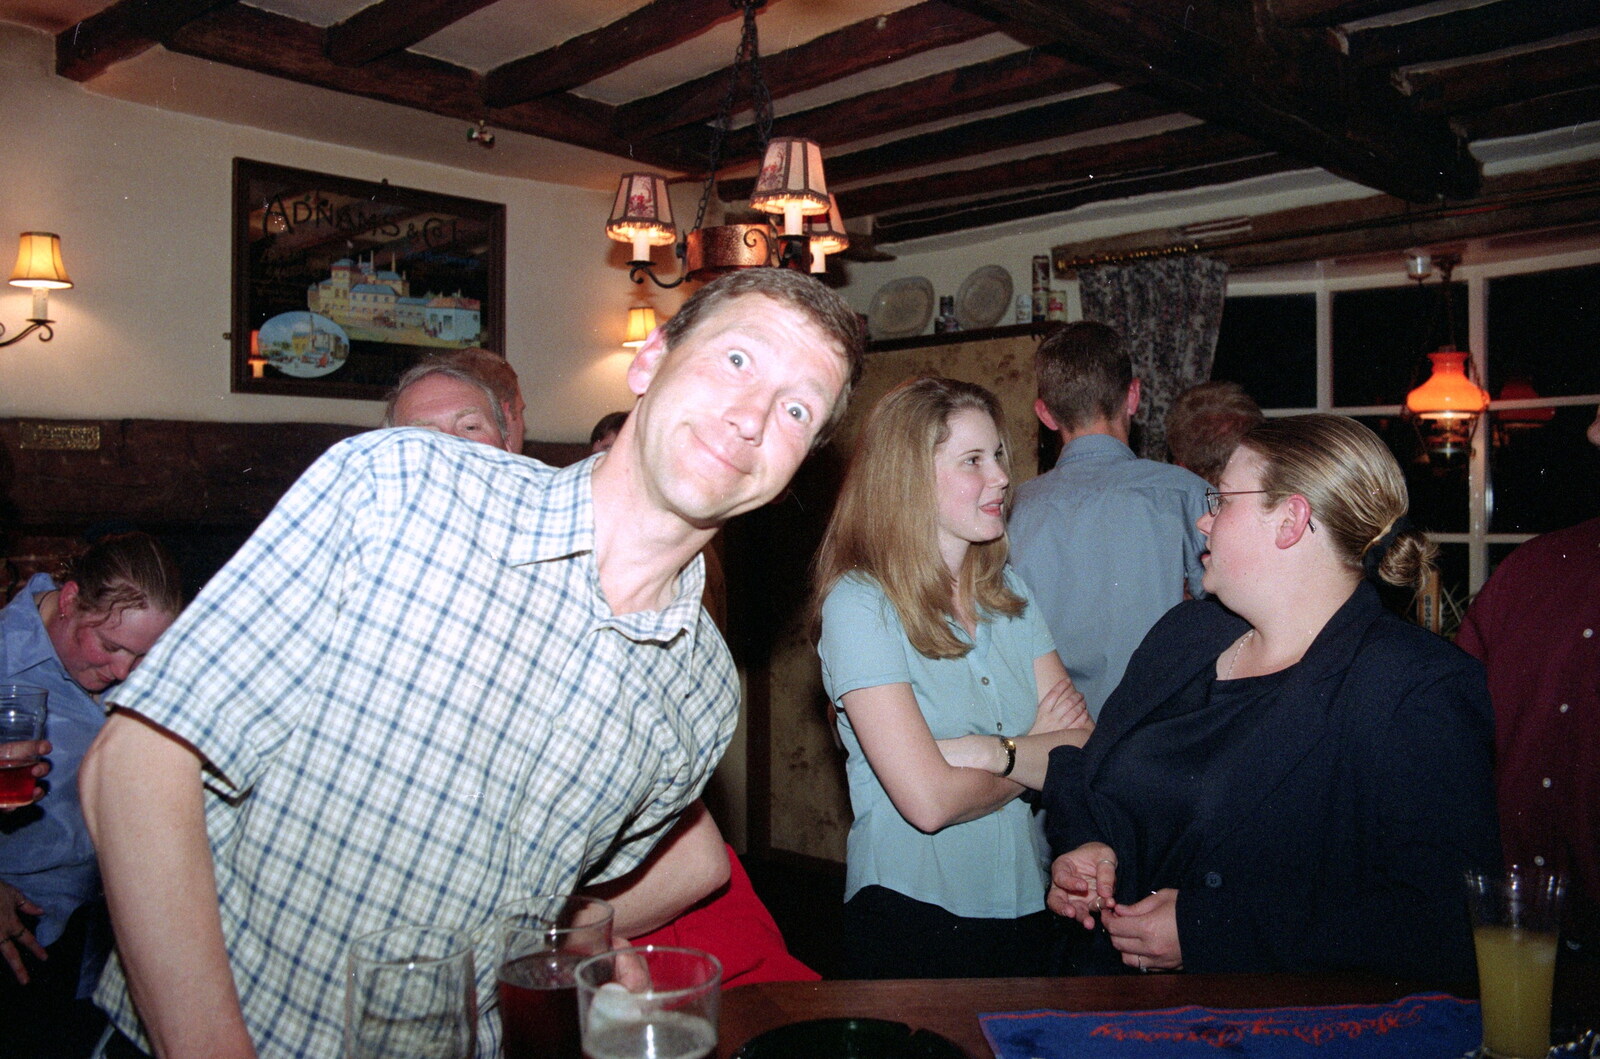 Apple leans over from Wavy's Thirtieth Birthday, The Swan Inn, Brome, Suffolk - 24th May 2000